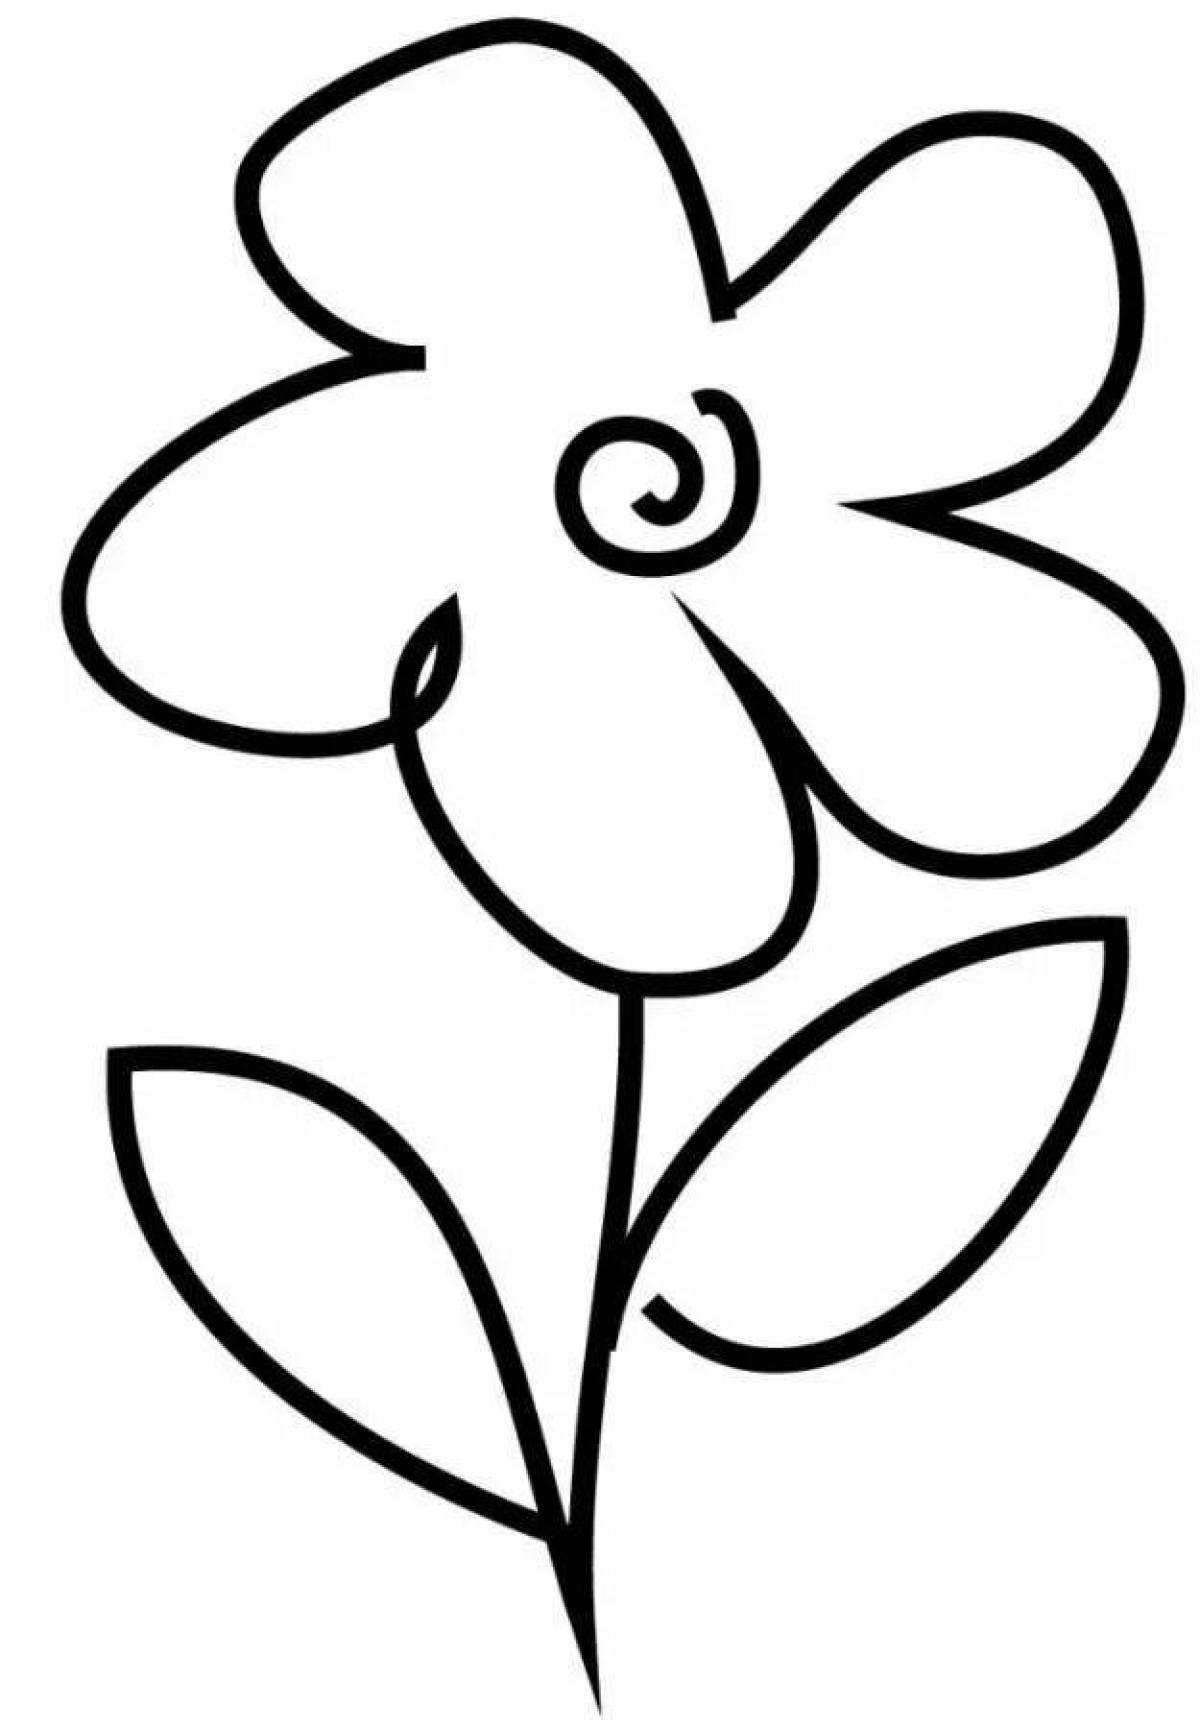 Sublime coloring page цветочная картинка